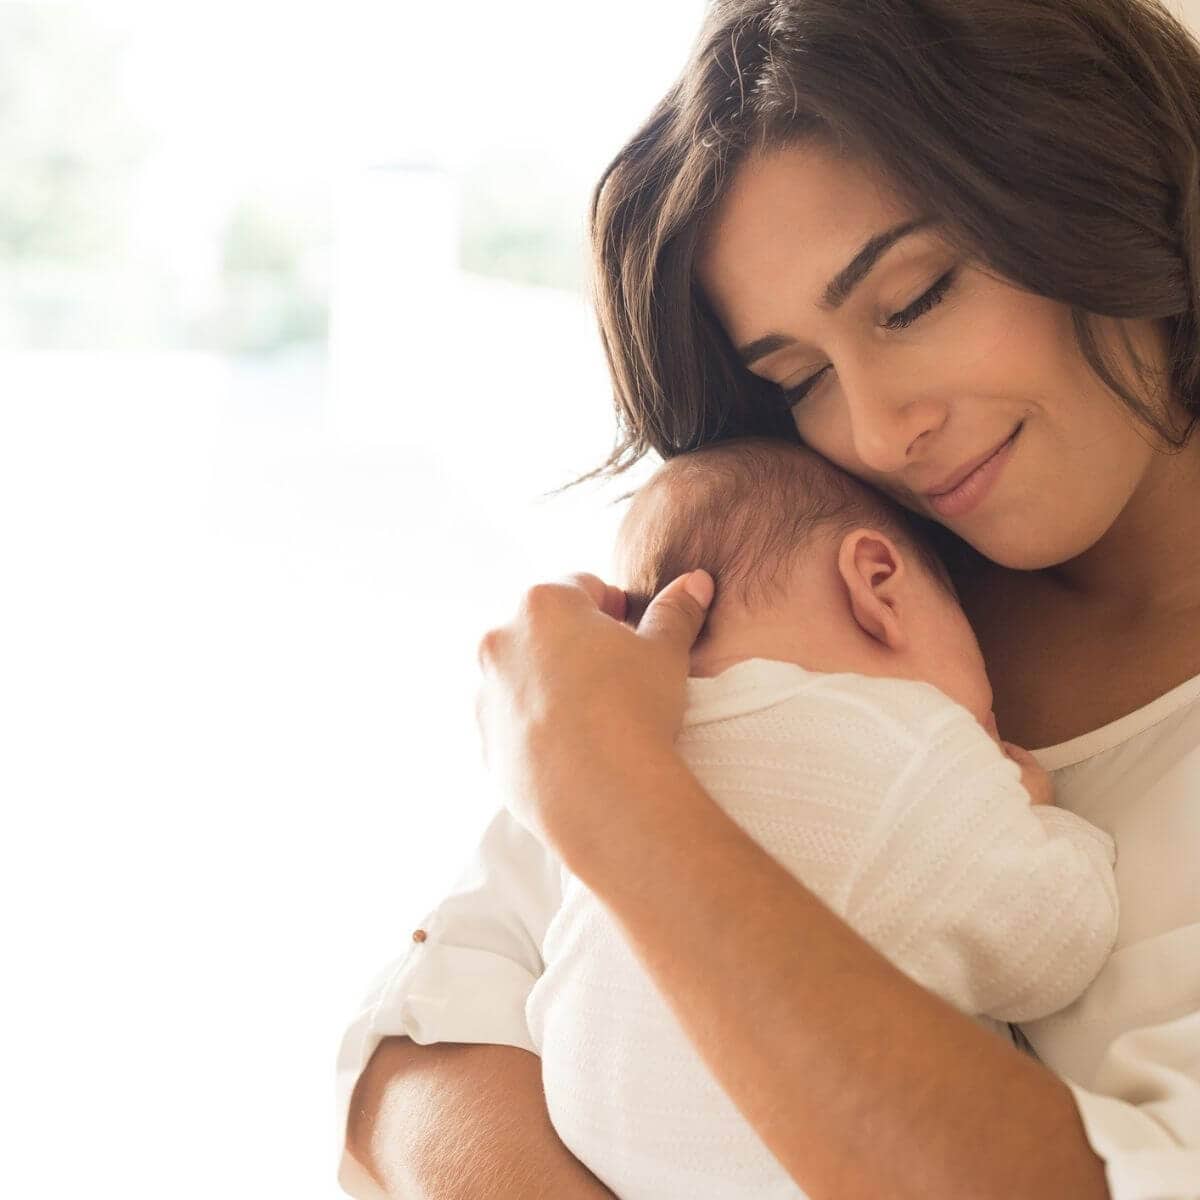 Caucasian woman with dark brown hair, eyes closed and smiling, in a white shirt snuggling a newborn baby in a white onesie to the side of her face